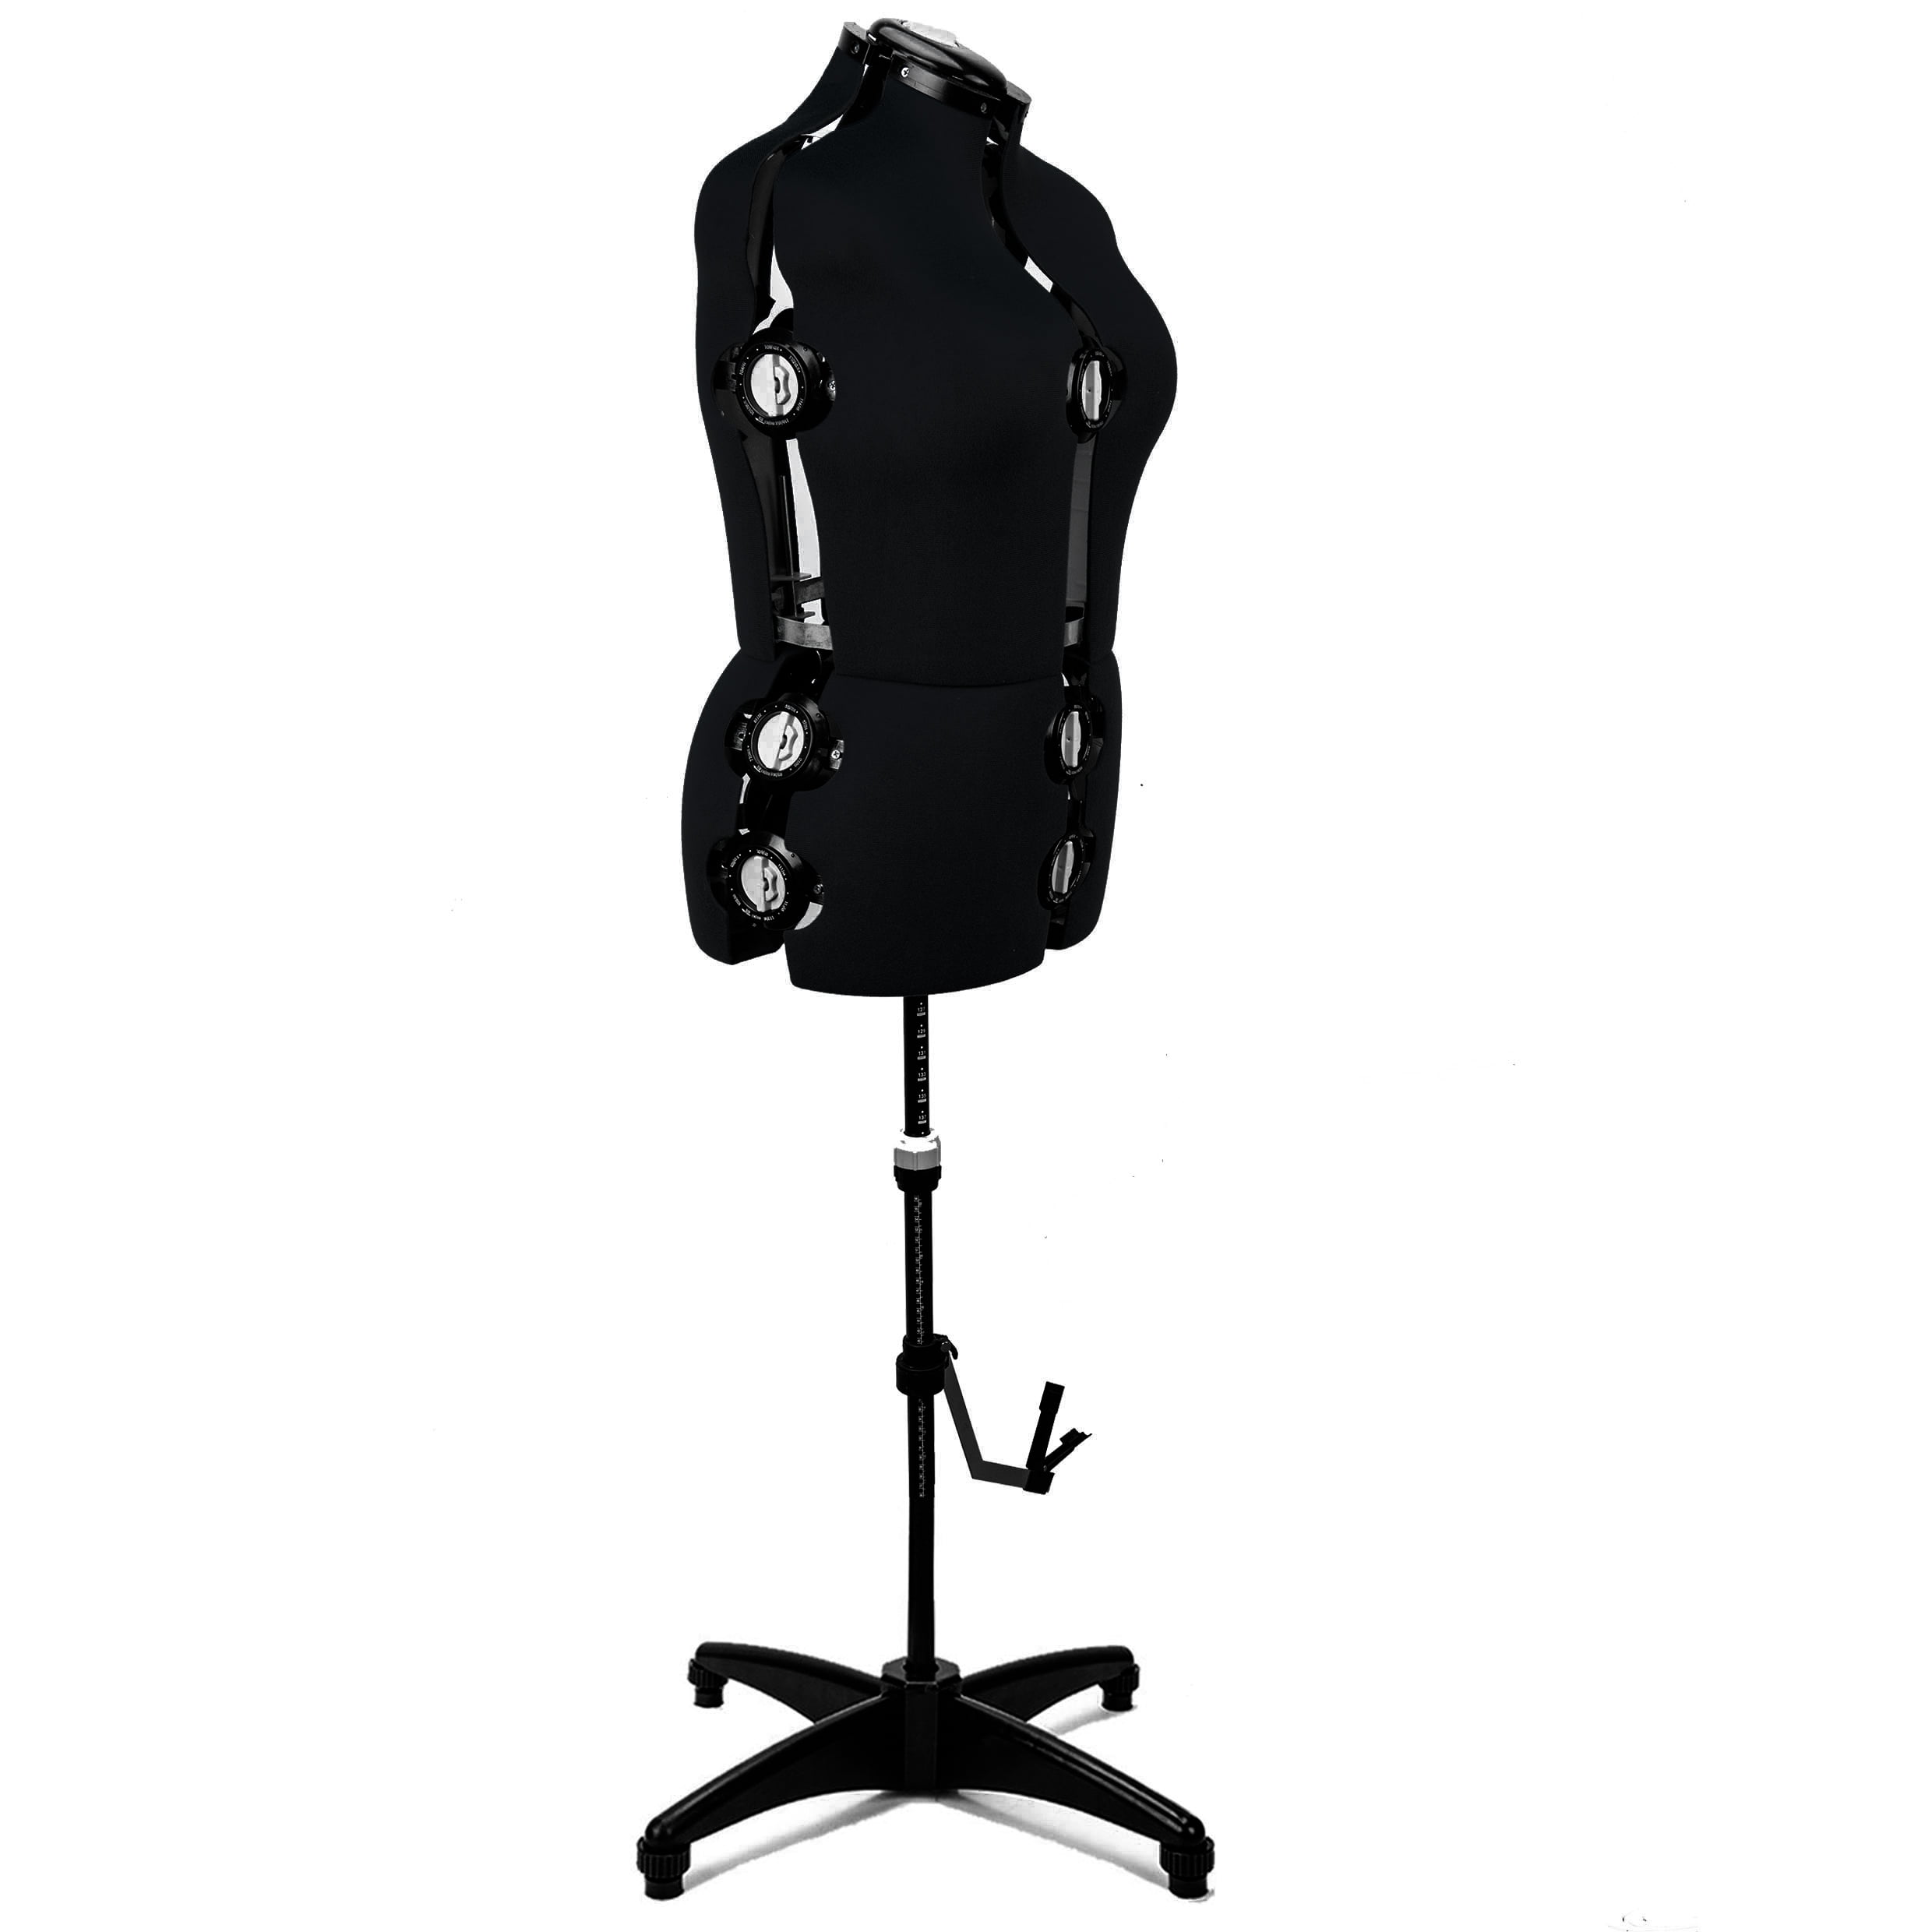 Buy Black mannequin for sale online - Voice Booster – TK Products LLC